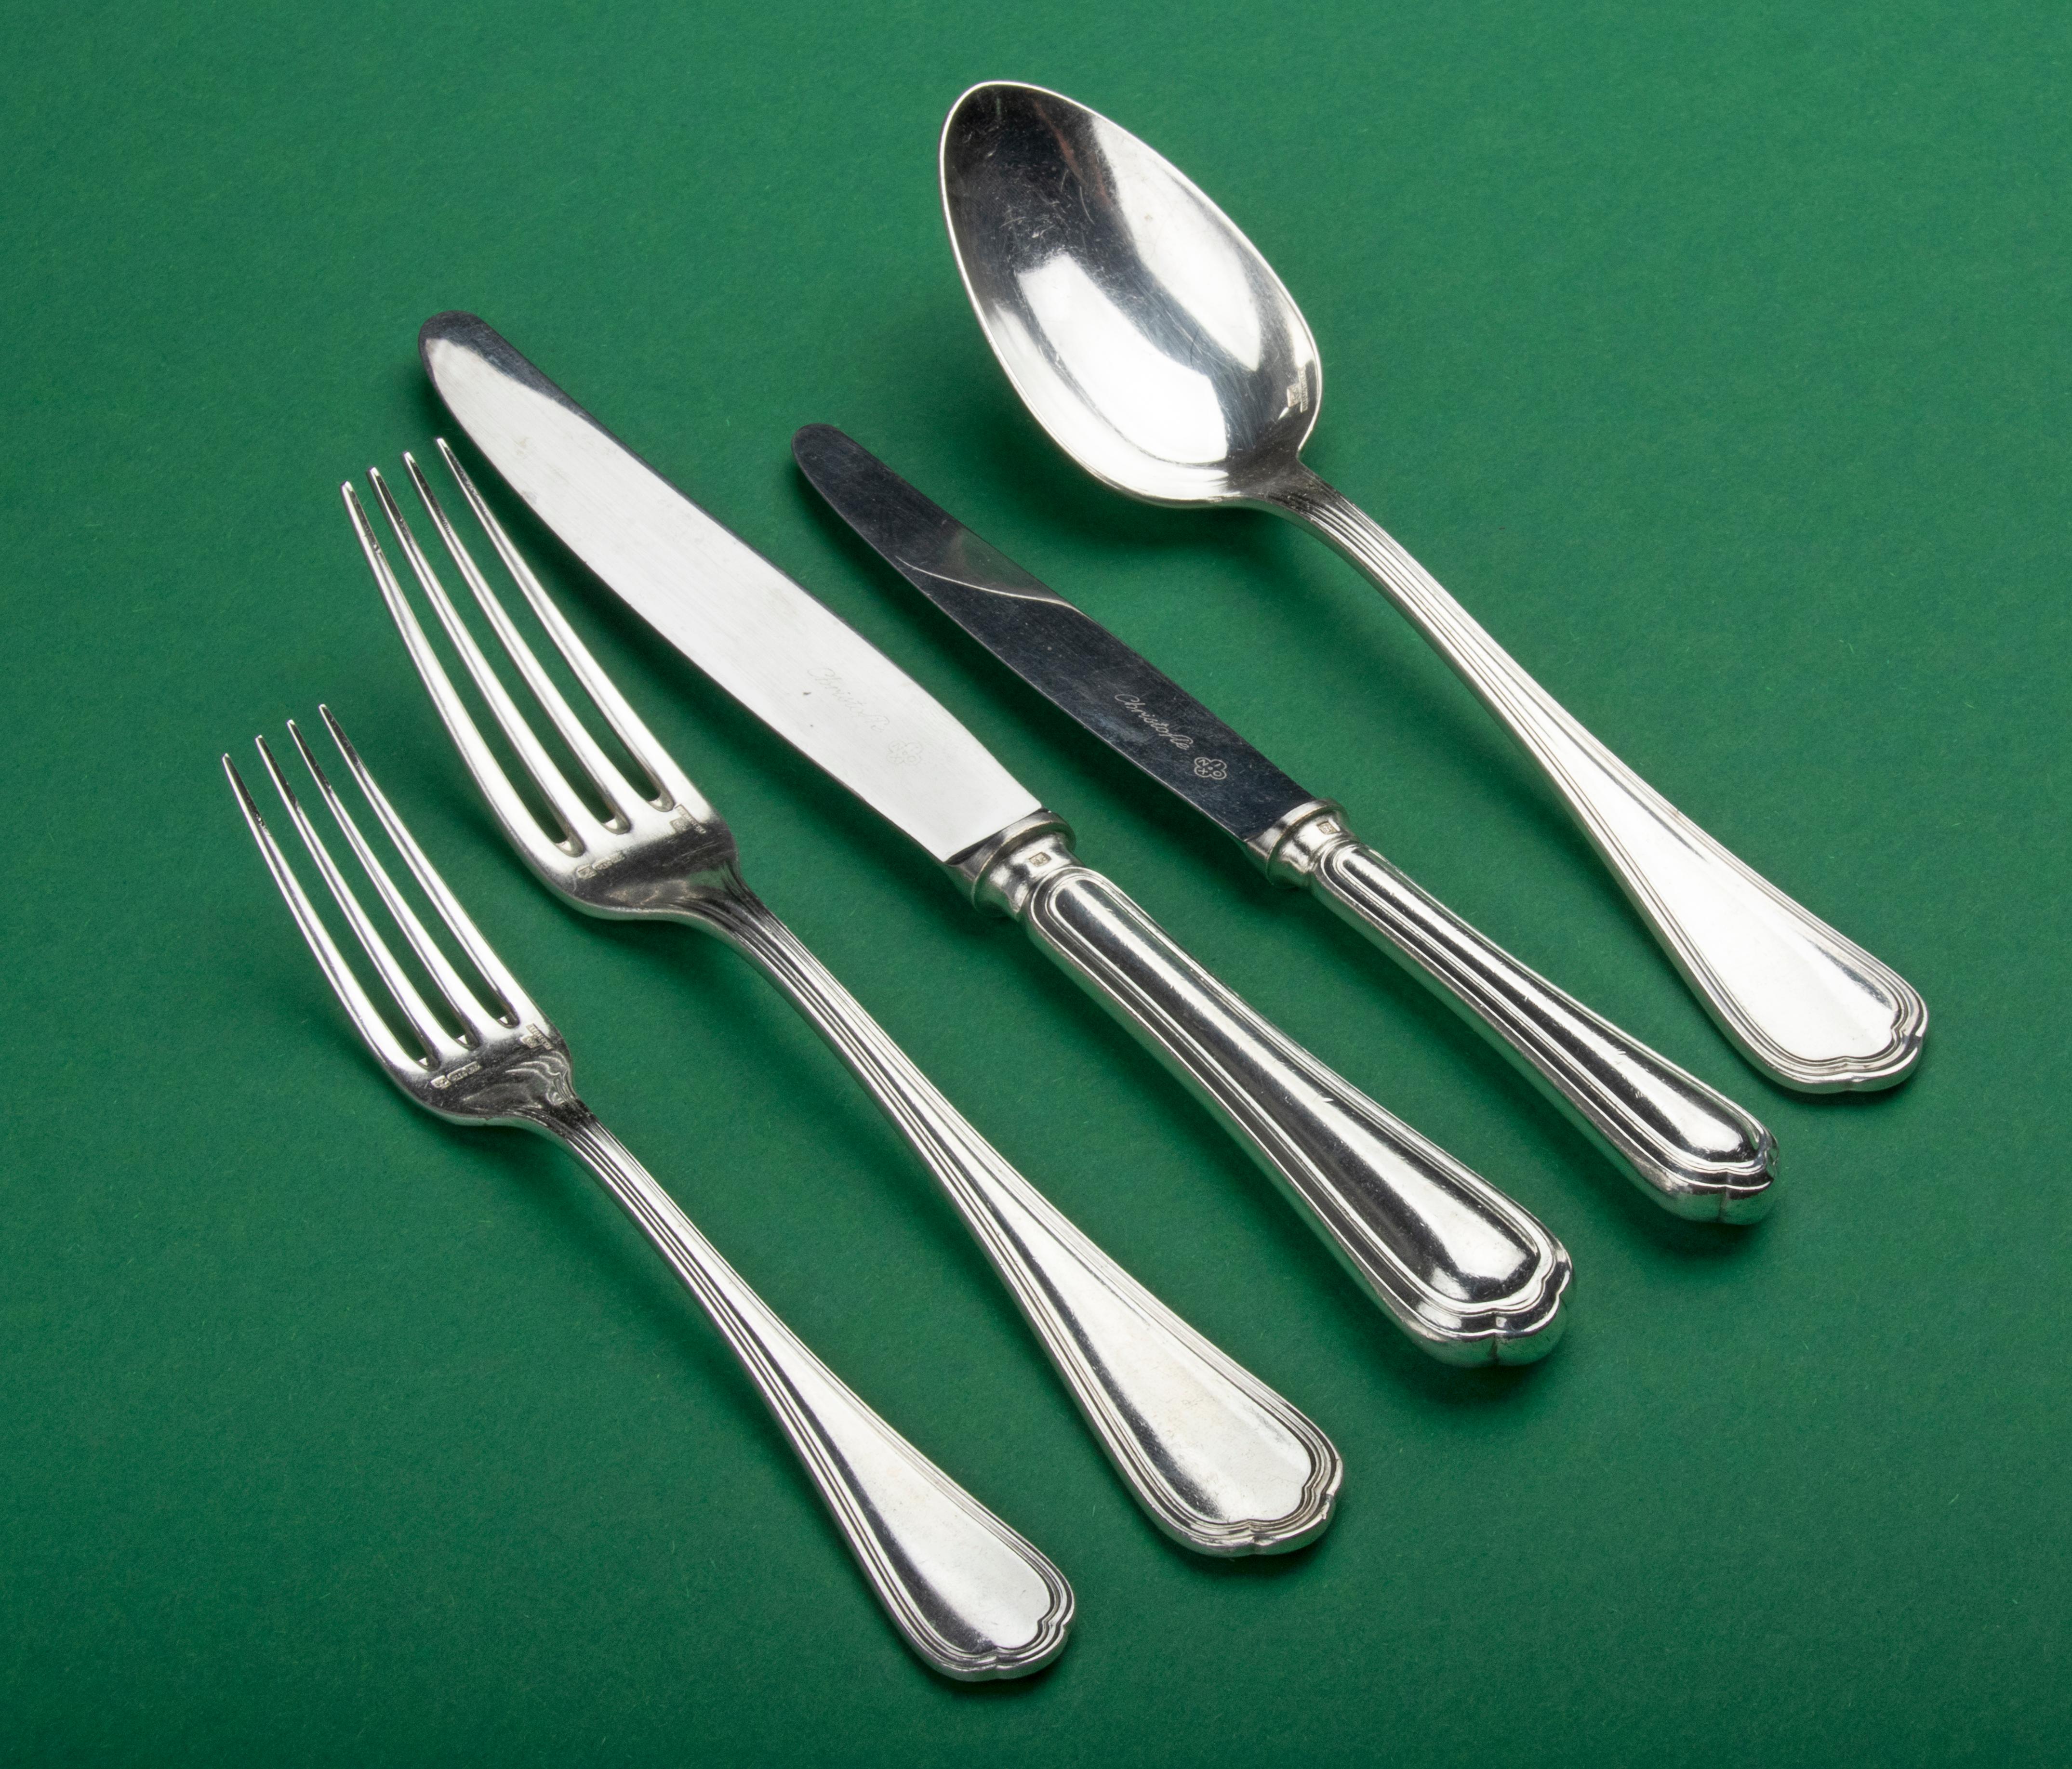 30-Piece Set of Silver Plated Flatware Made by Christofle Model Spatours 1